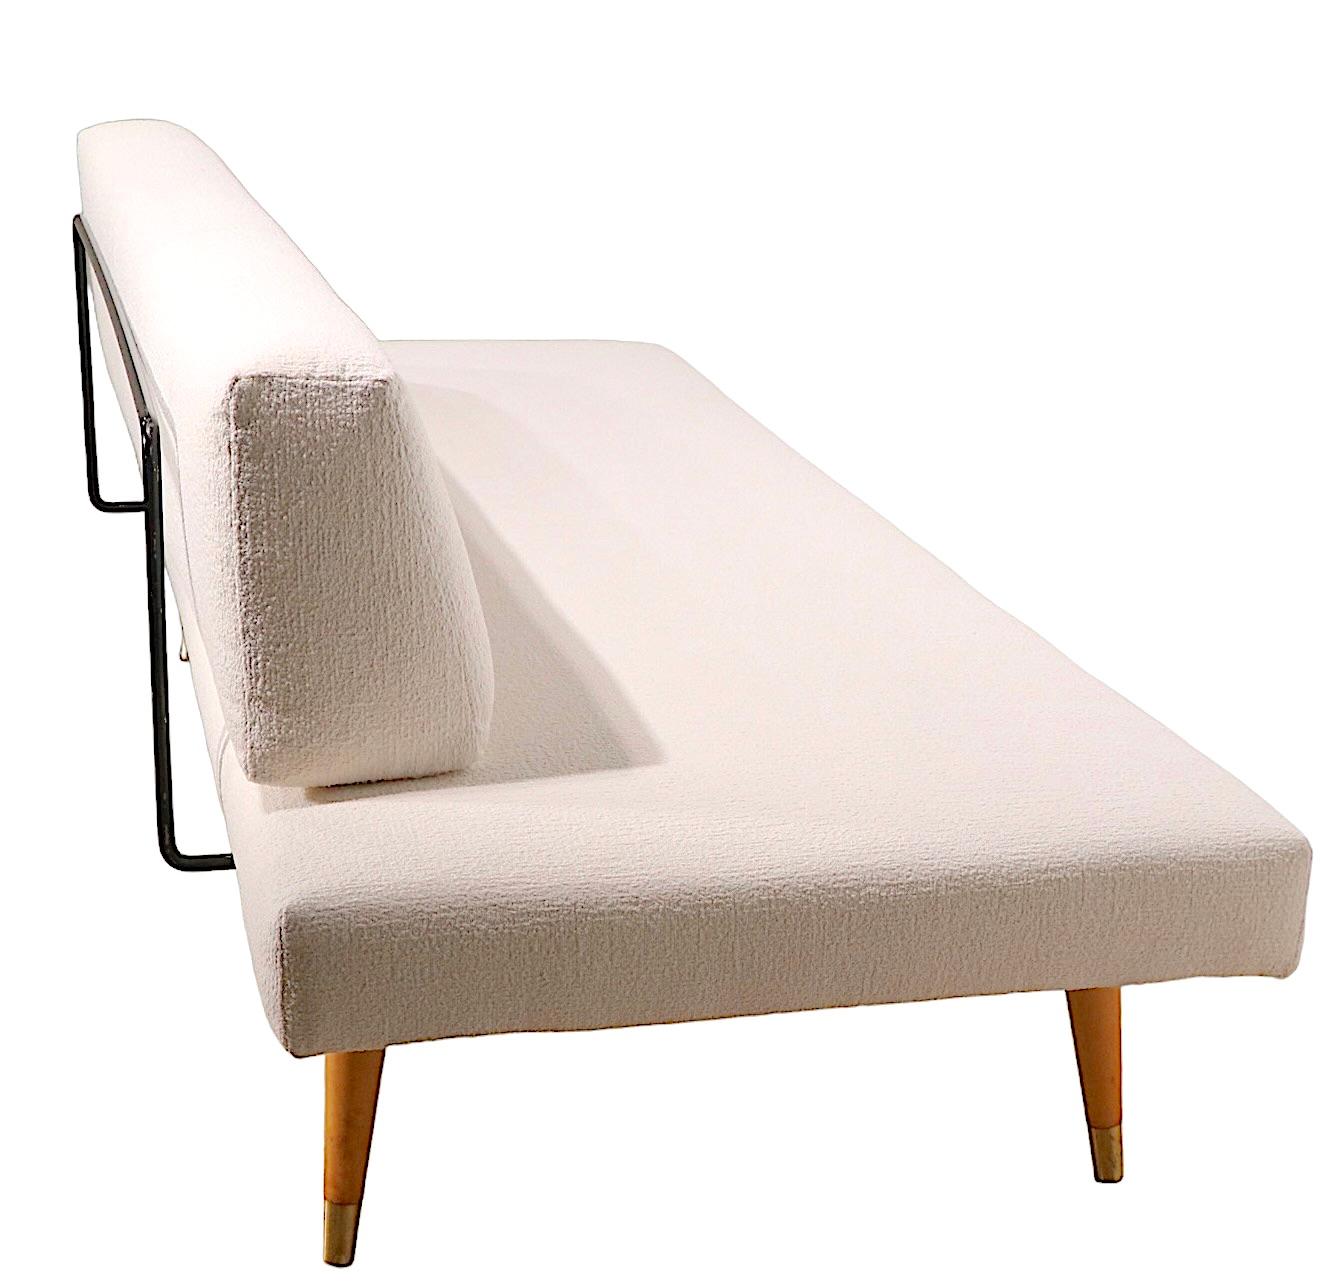 Pr. Mid Century Daybeds Newly Upholstered in Off White Boucle Fabric, c. 1950's 5